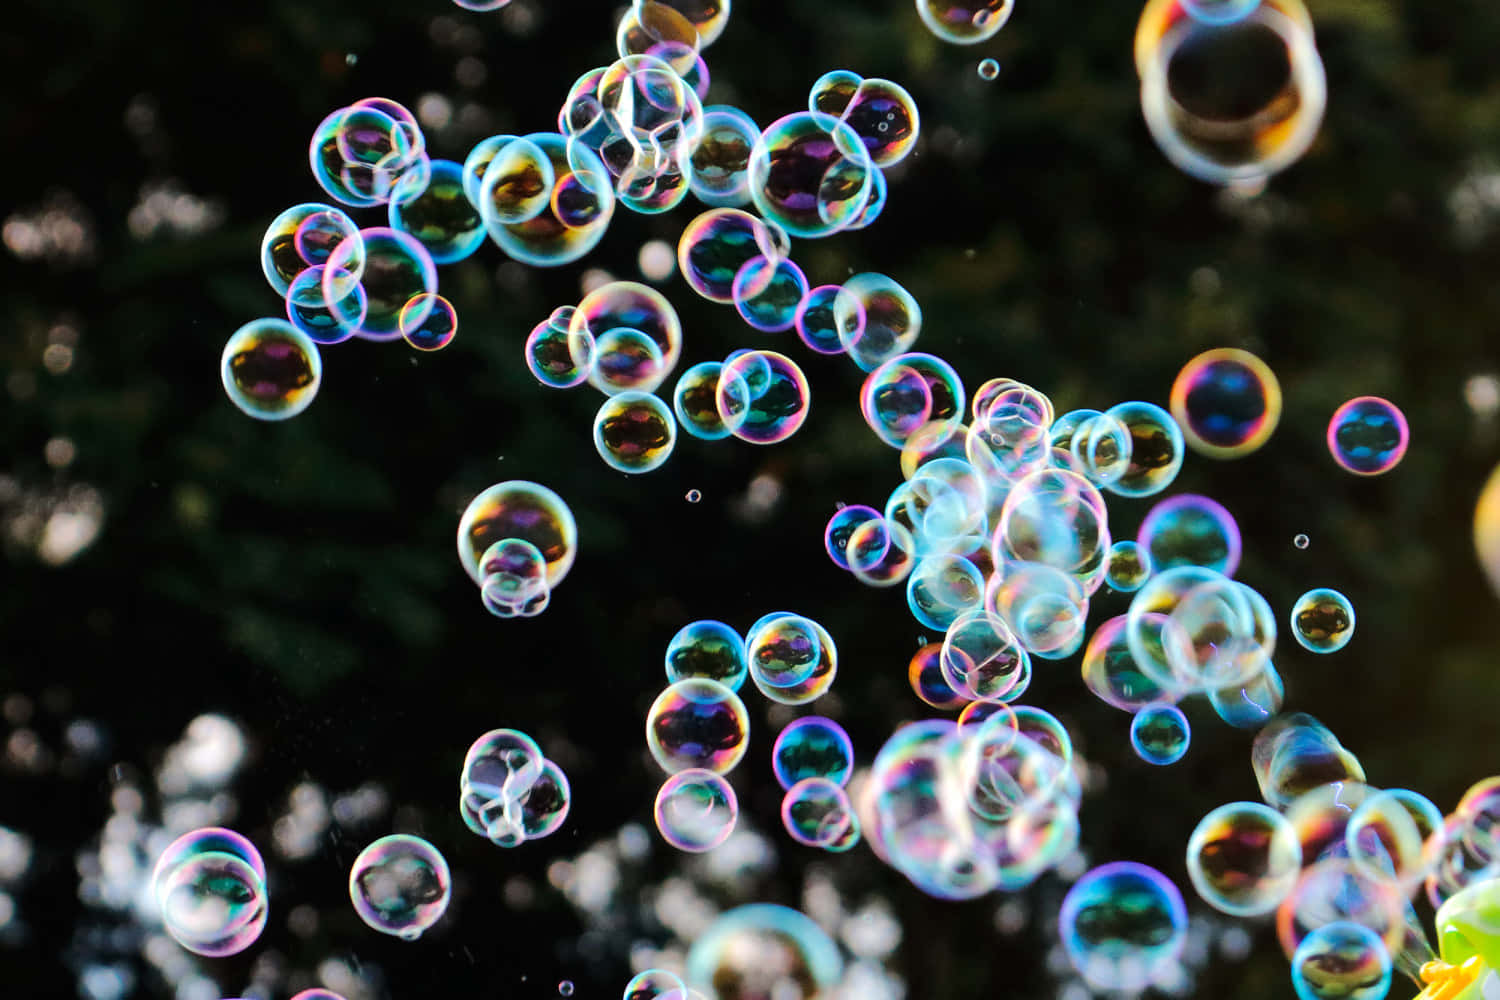 A Group Of Soap Bubbles Floating In The Air